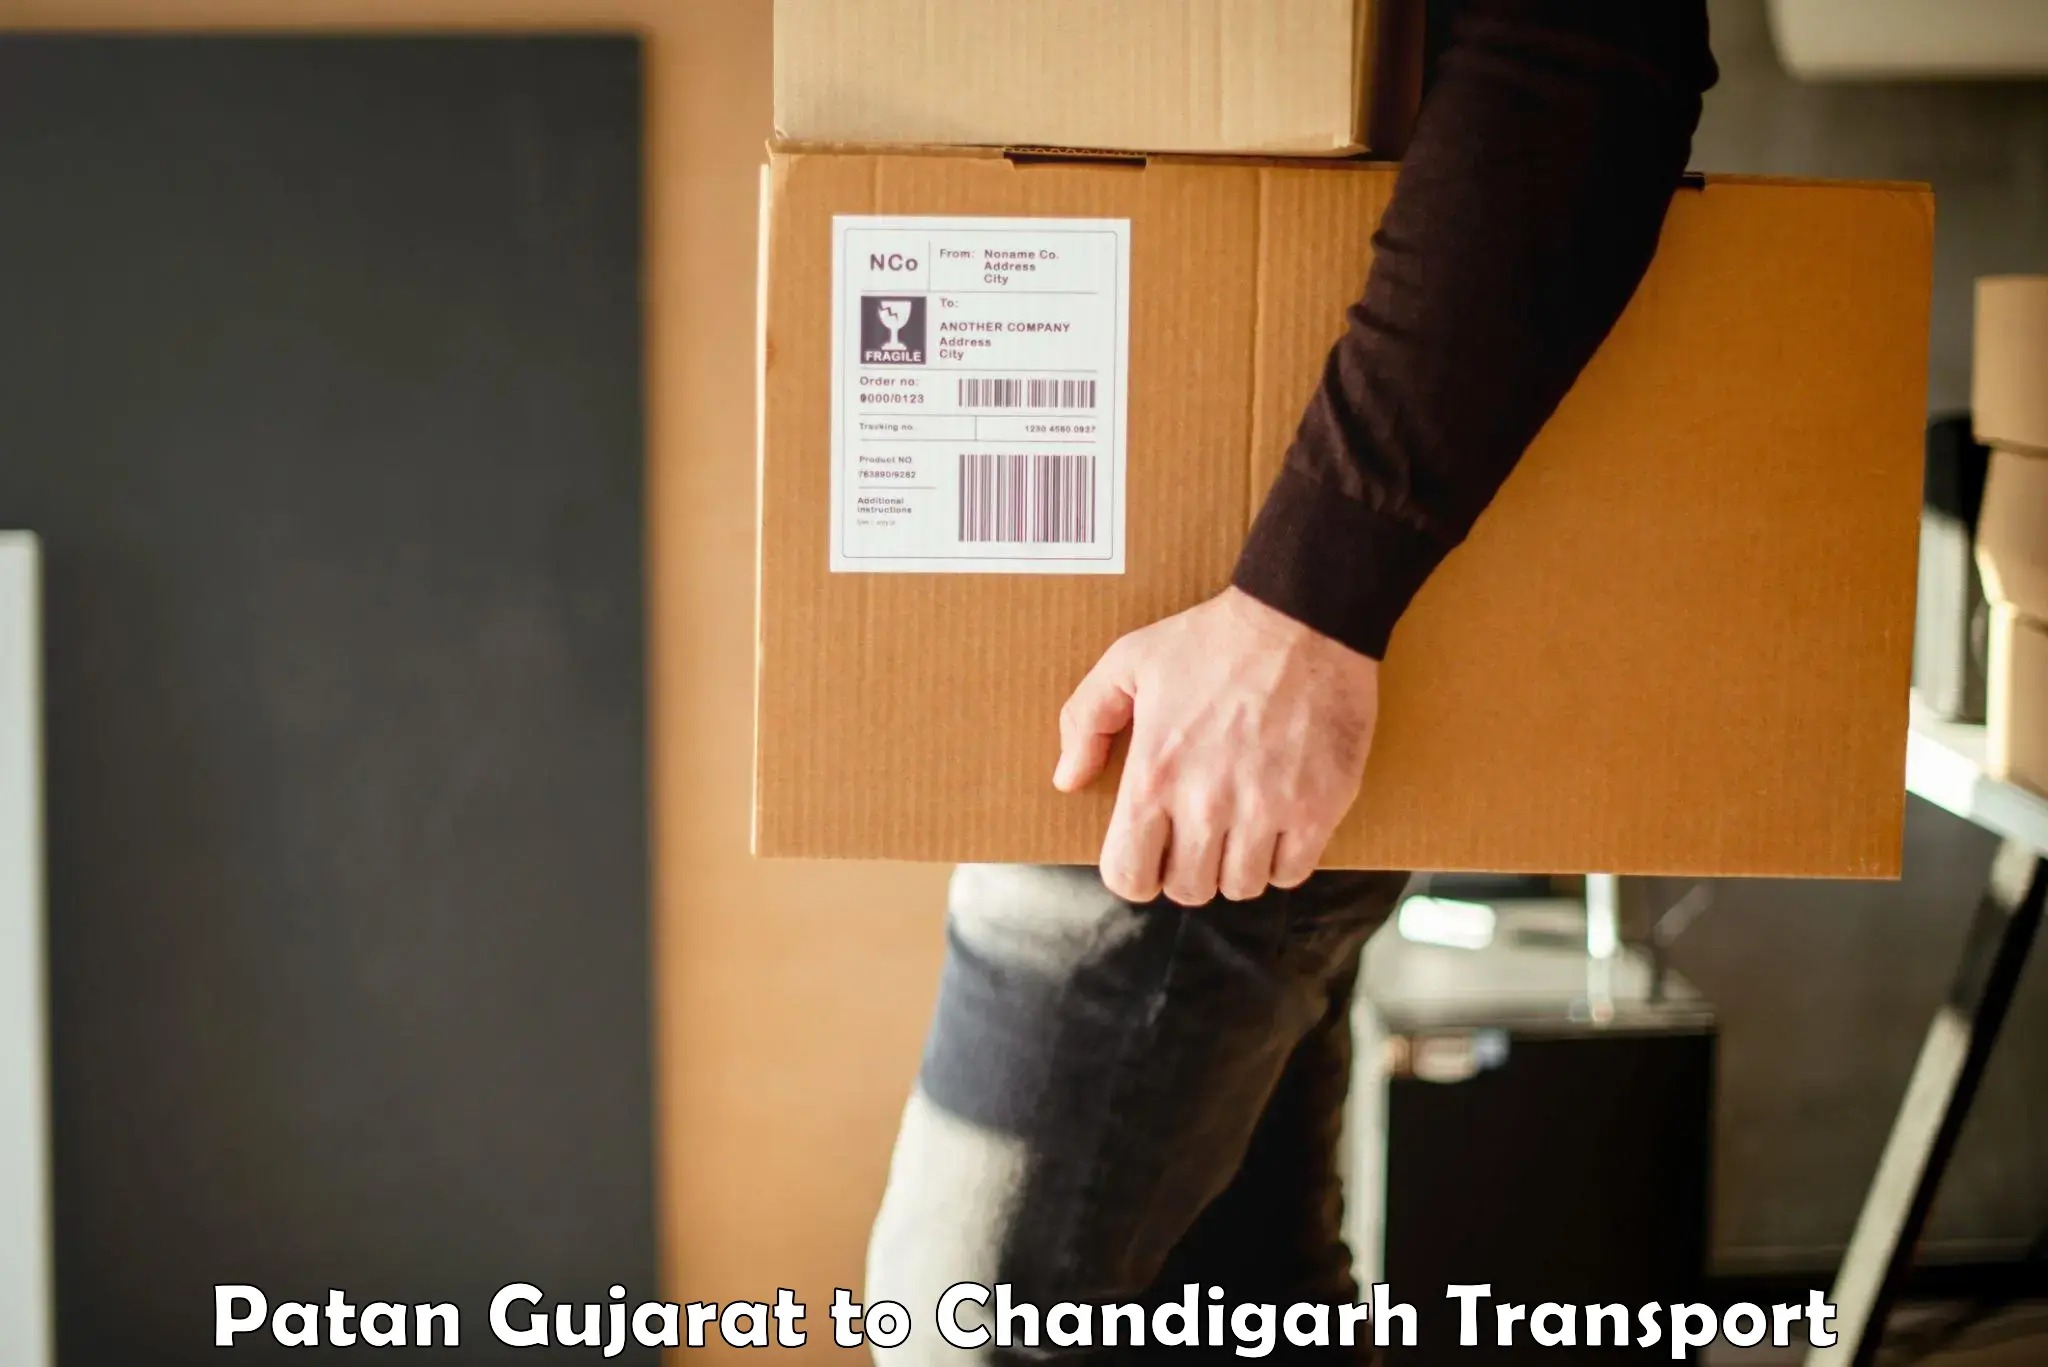 Delivery service Patan Gujarat to Chandigarh